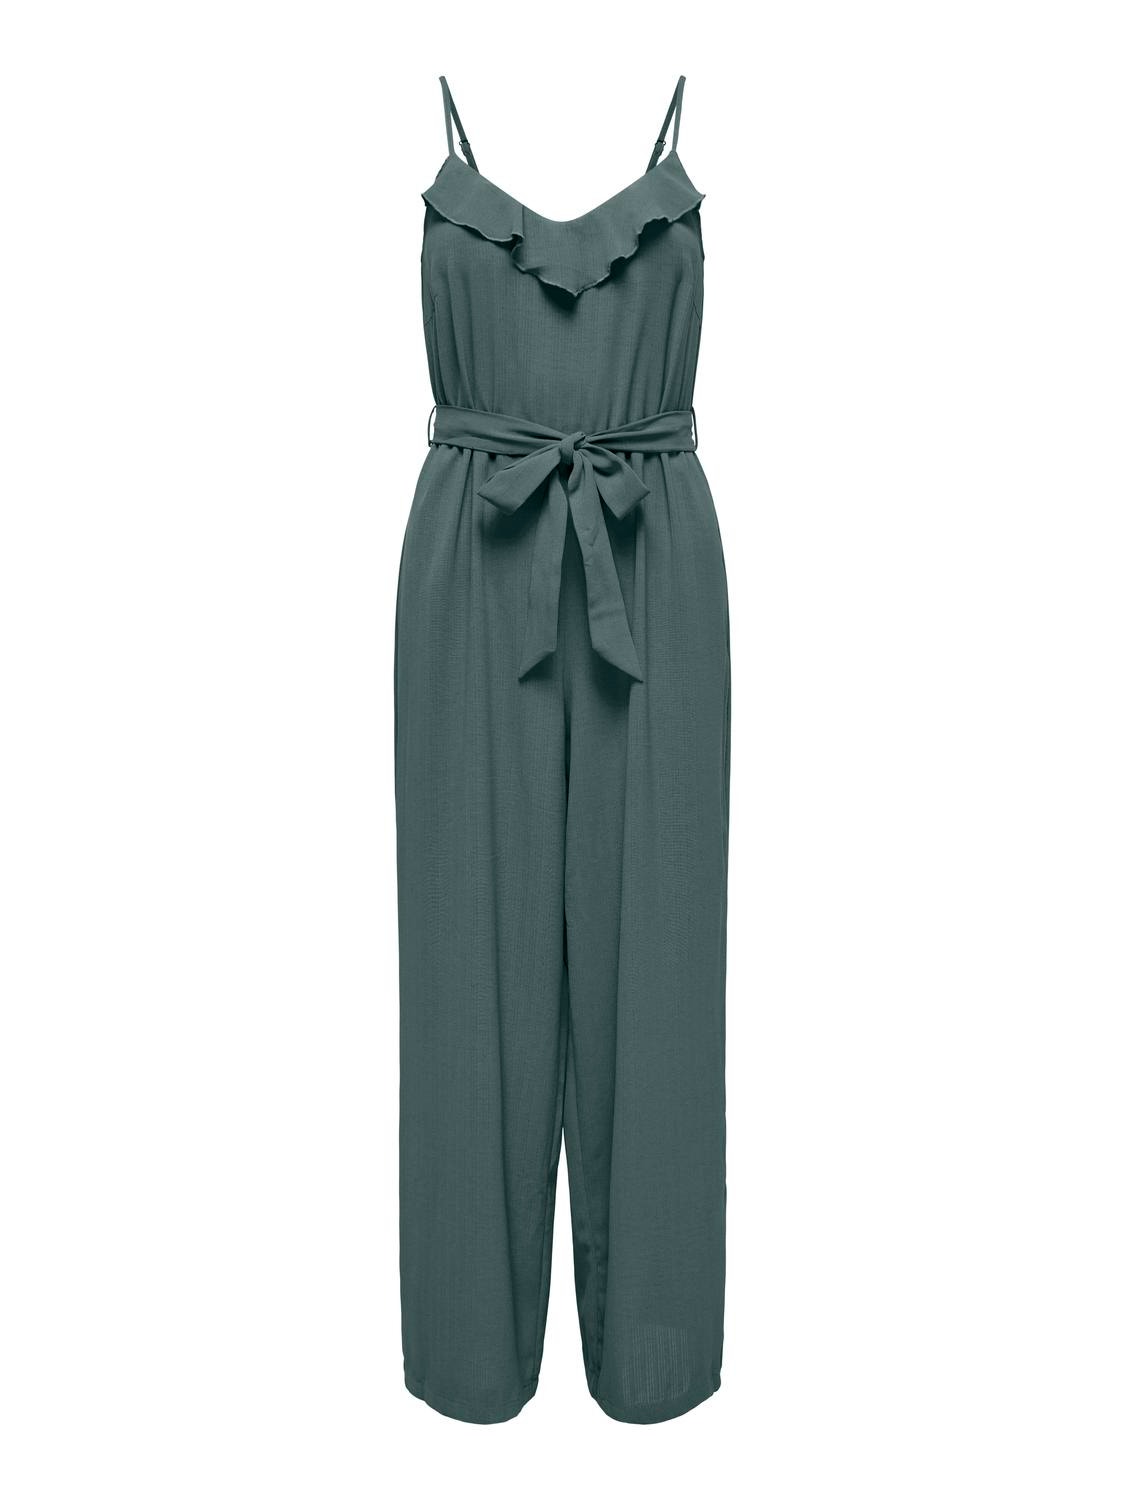 ONLY Smale stropper Jumpsuit -Balsam Green - 15325078